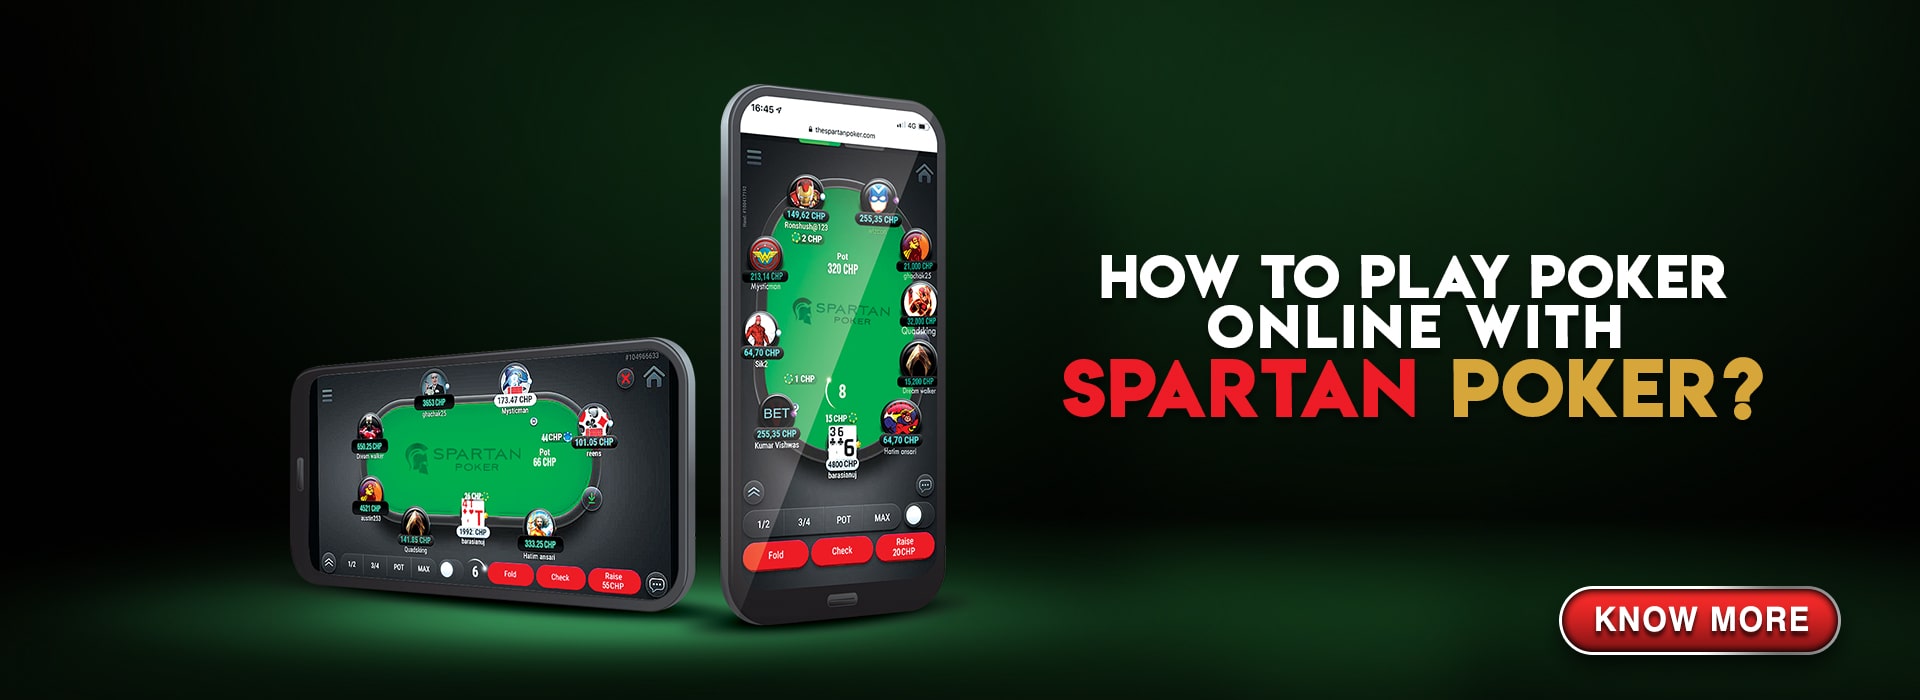 How to play poker online with Spartan Poker?